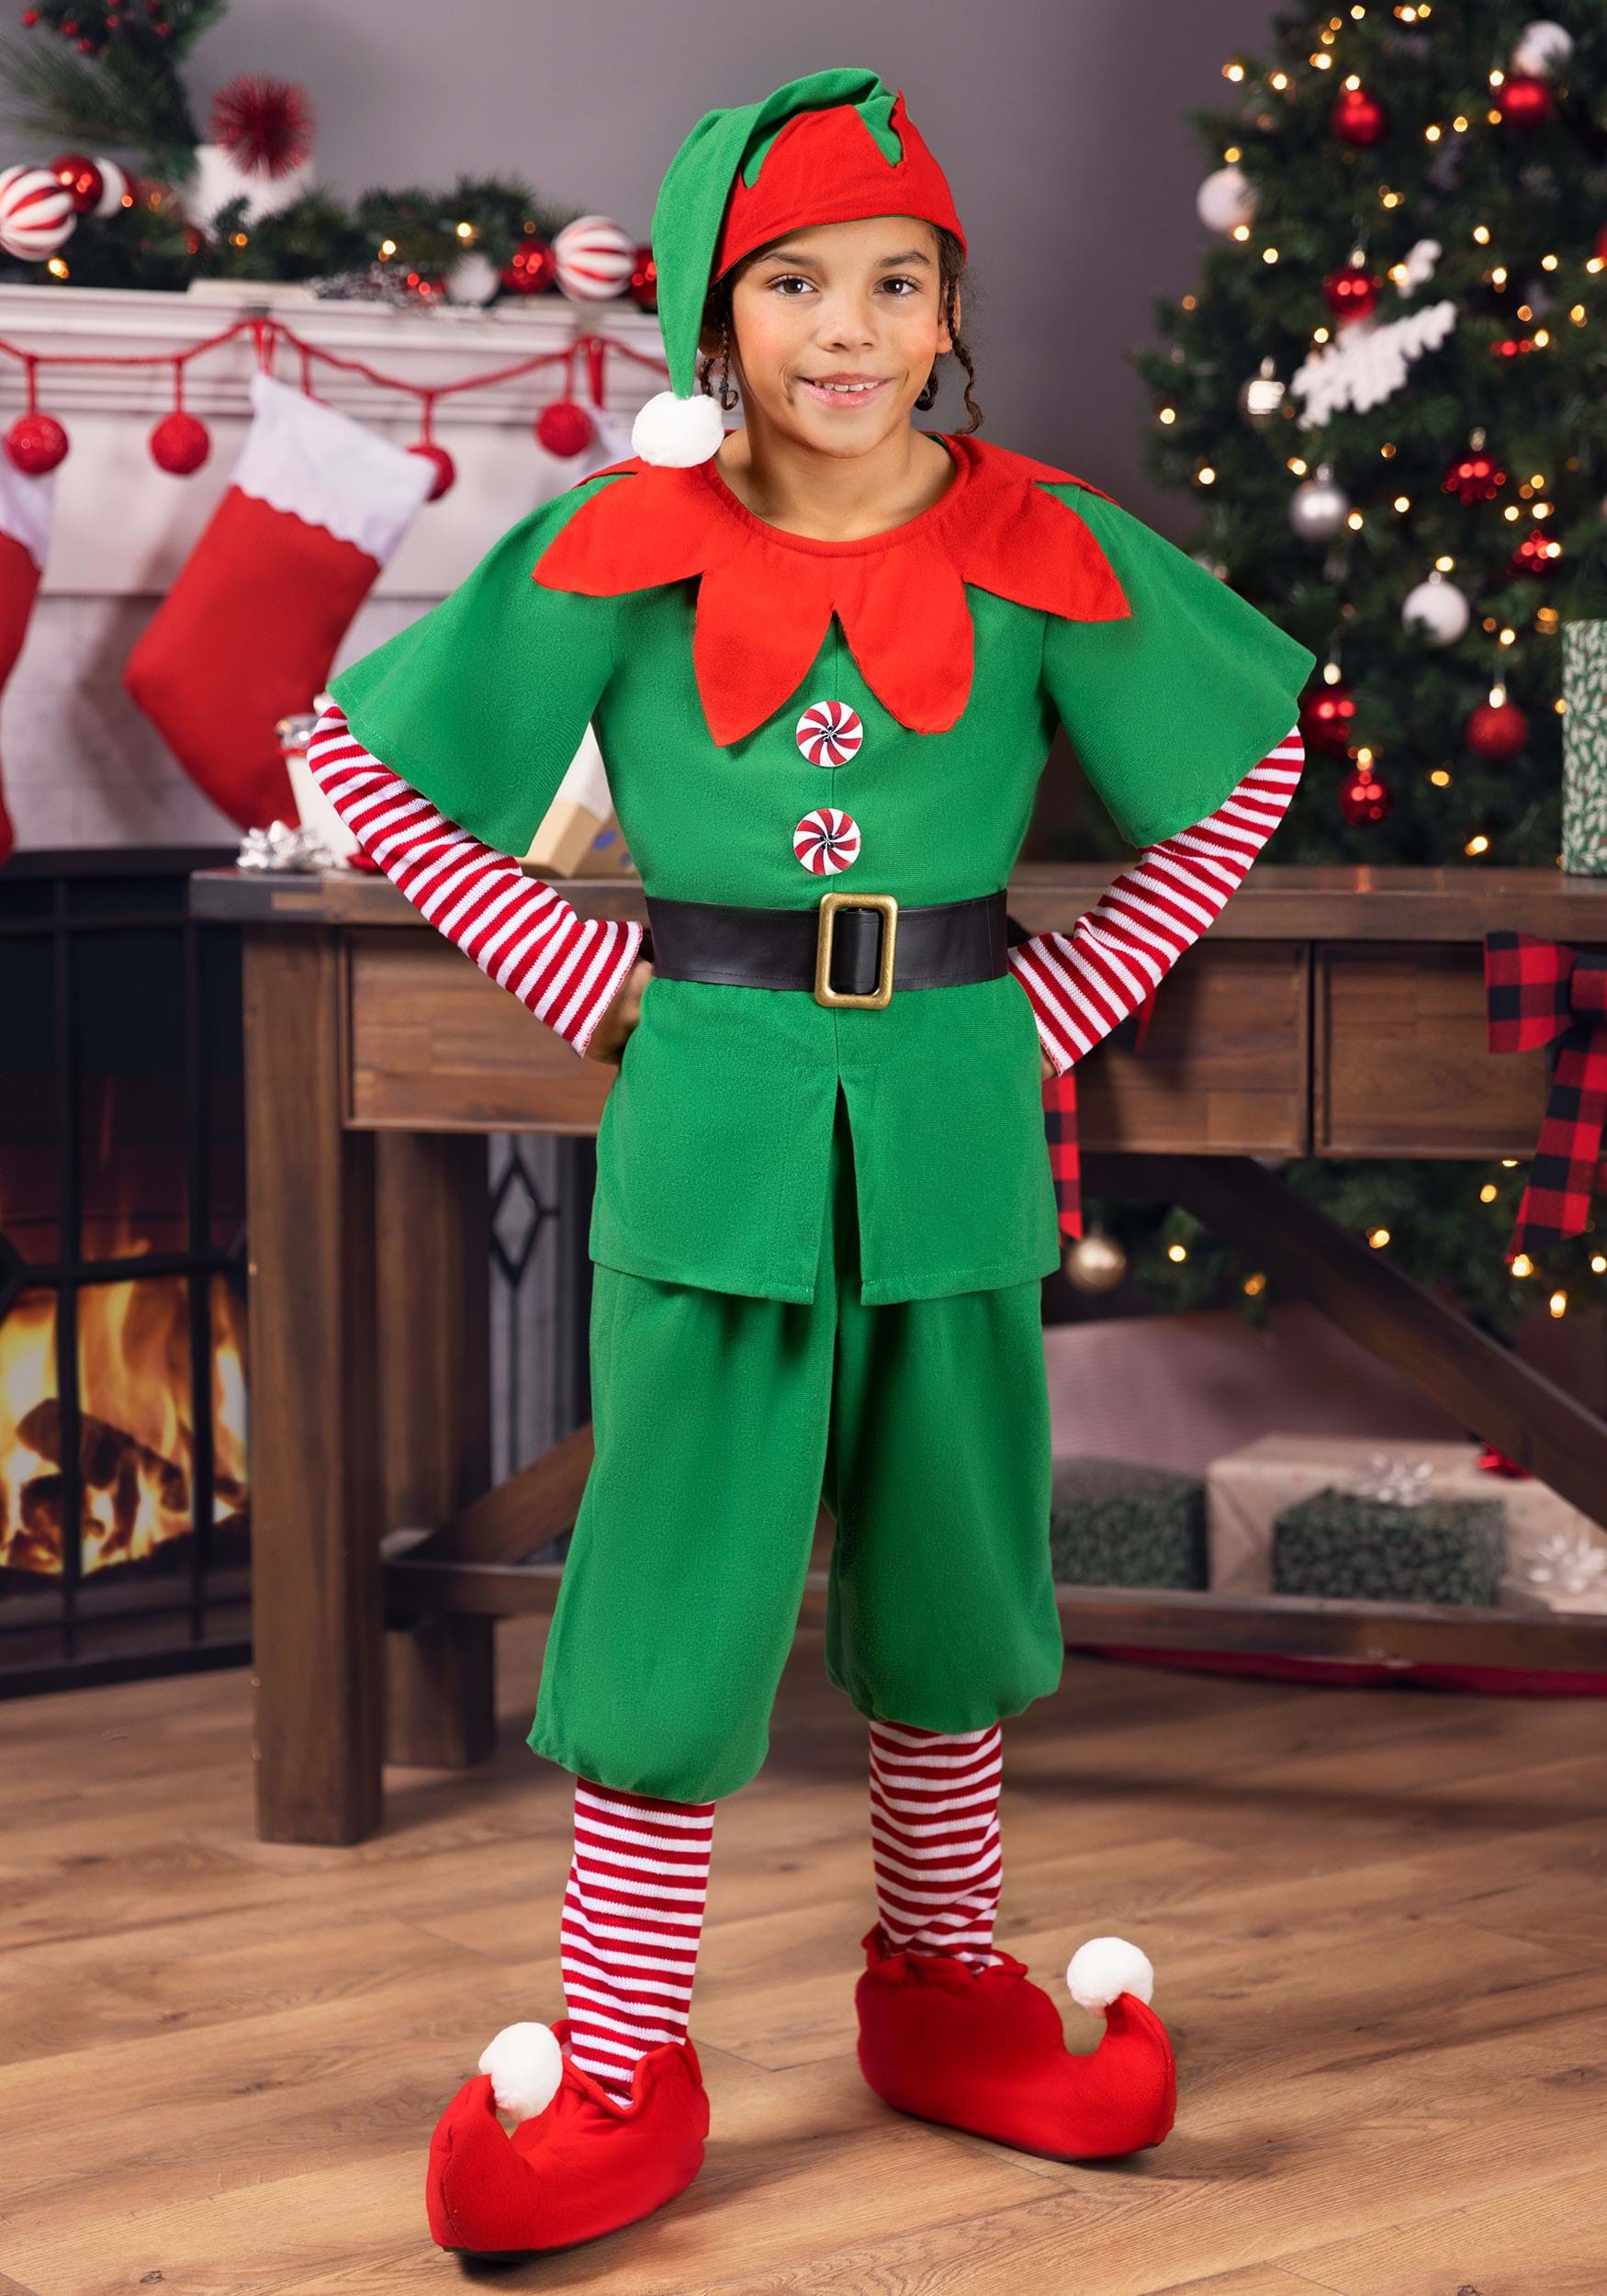 https://images.halloween.com/products/23094/1-1/child-holiday-elf-costume.jpg